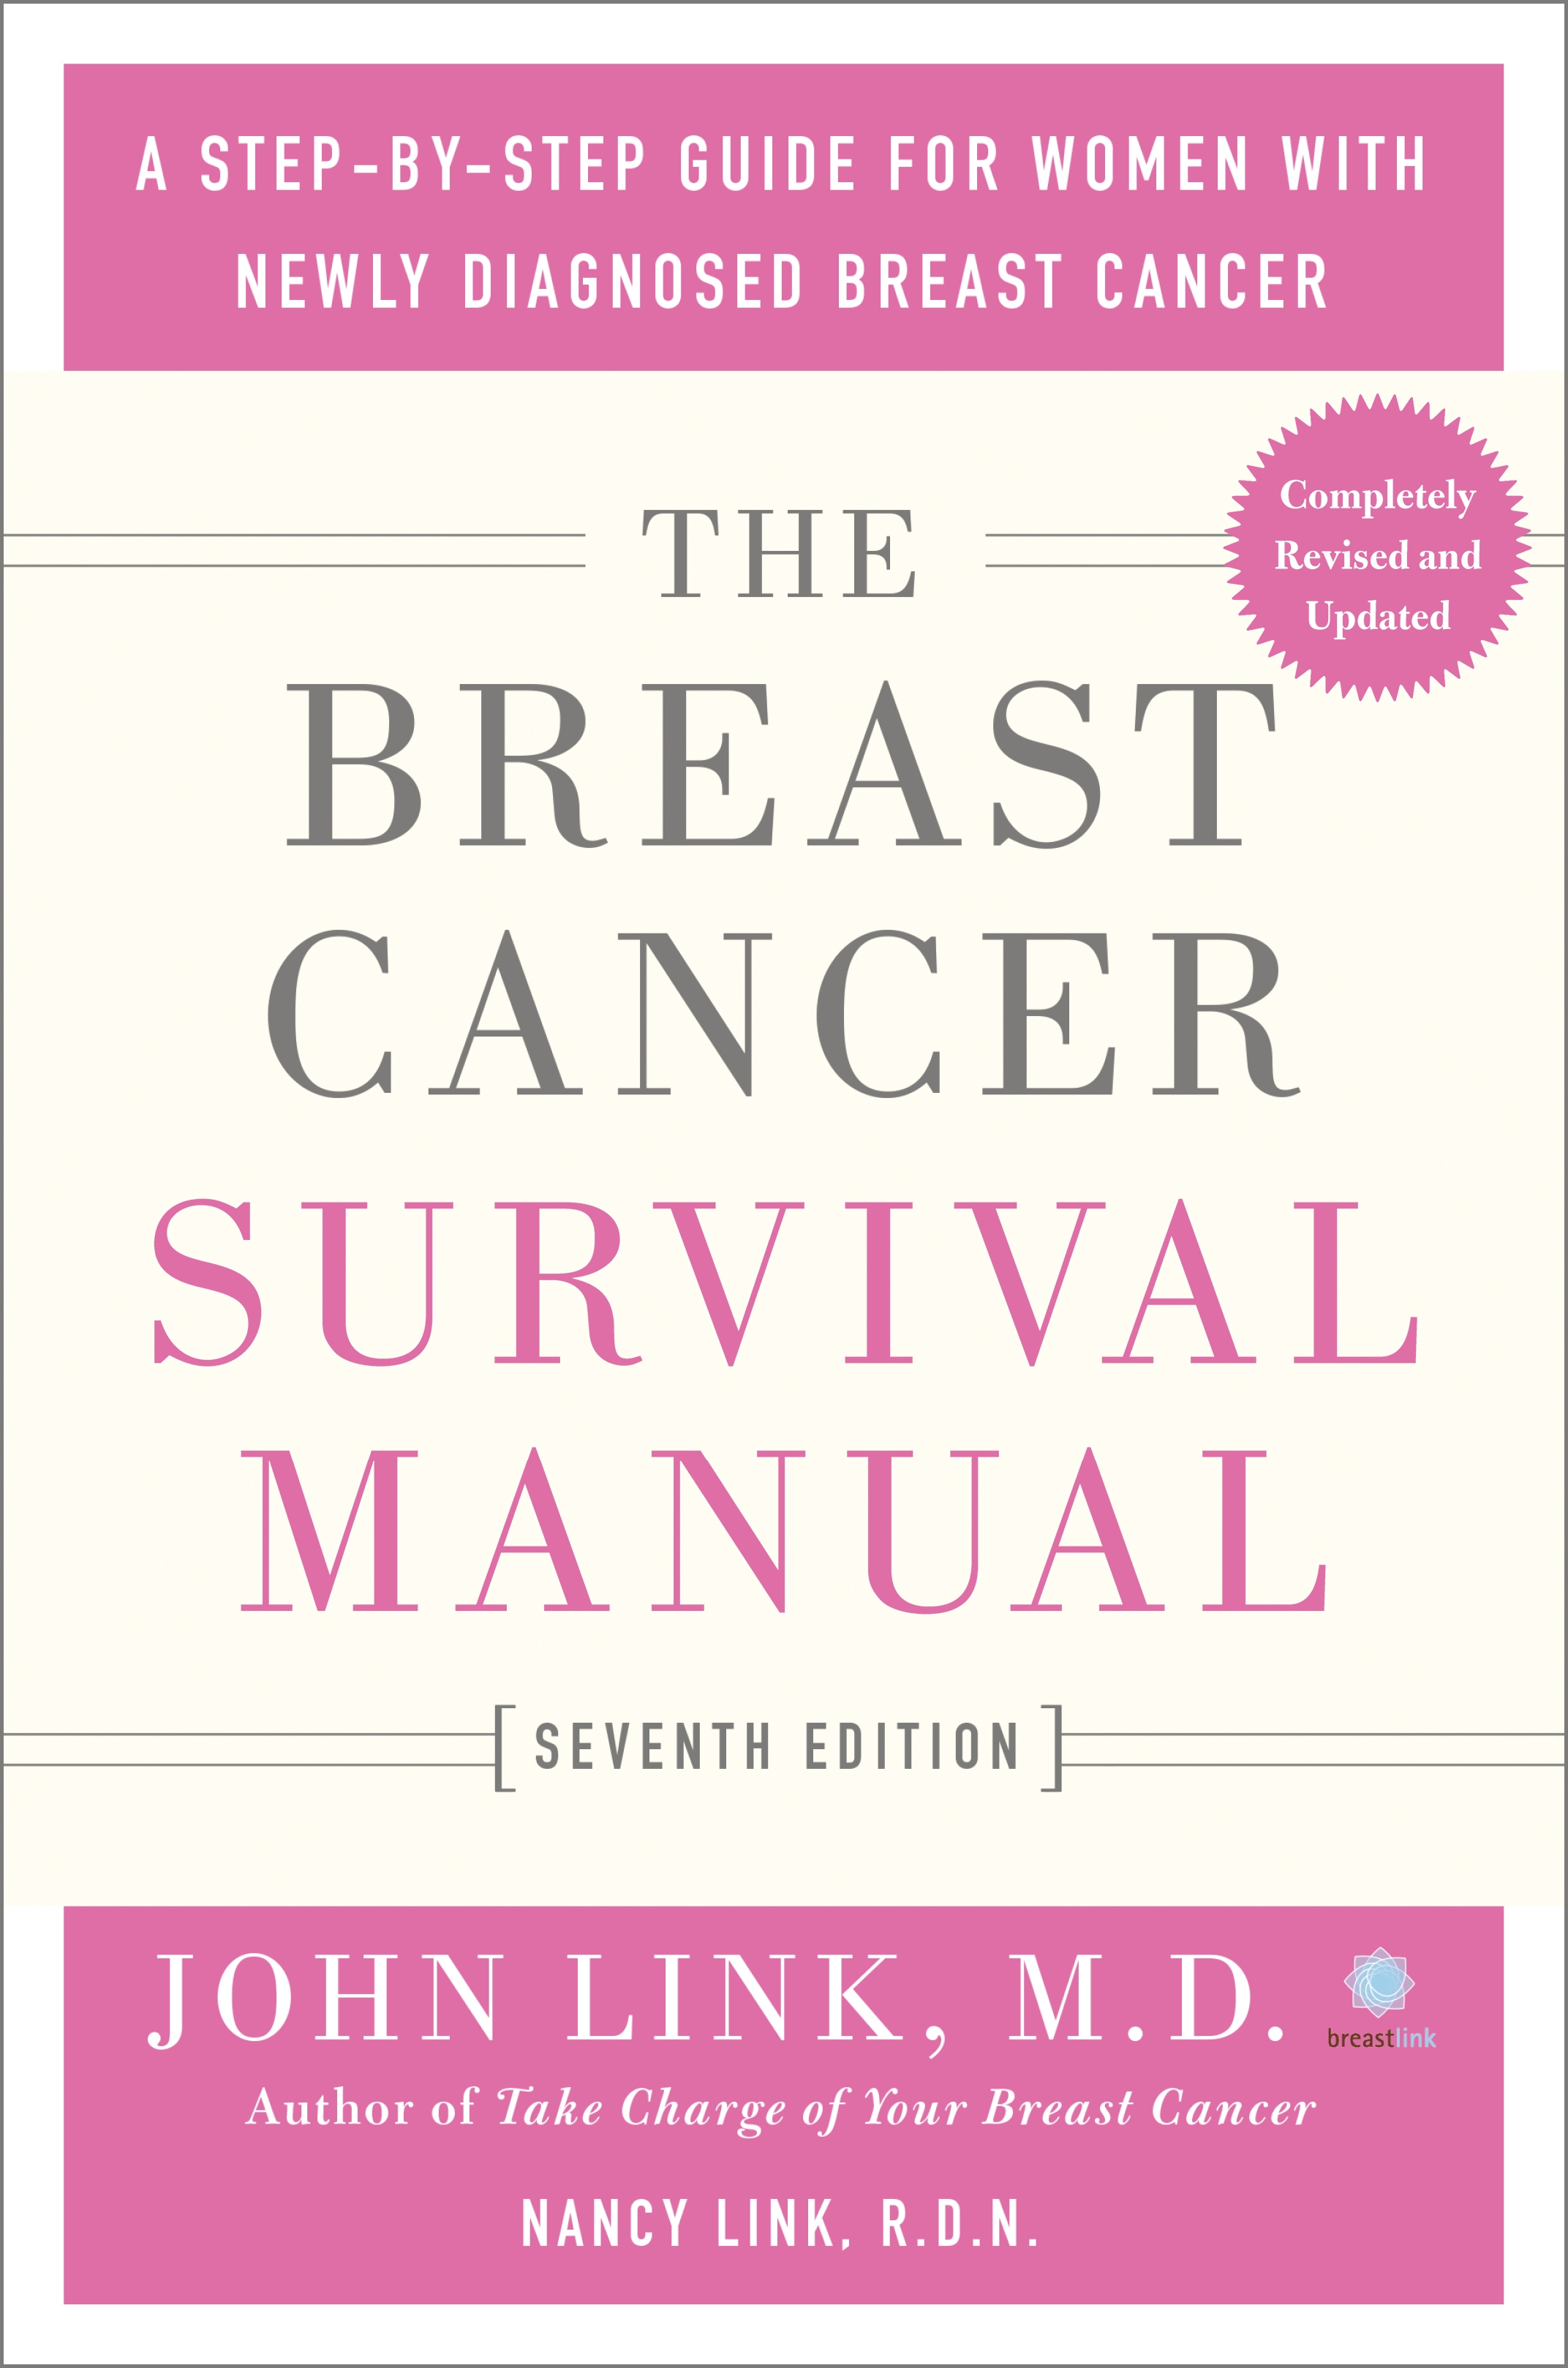 The Breast Cancer Survival Manual